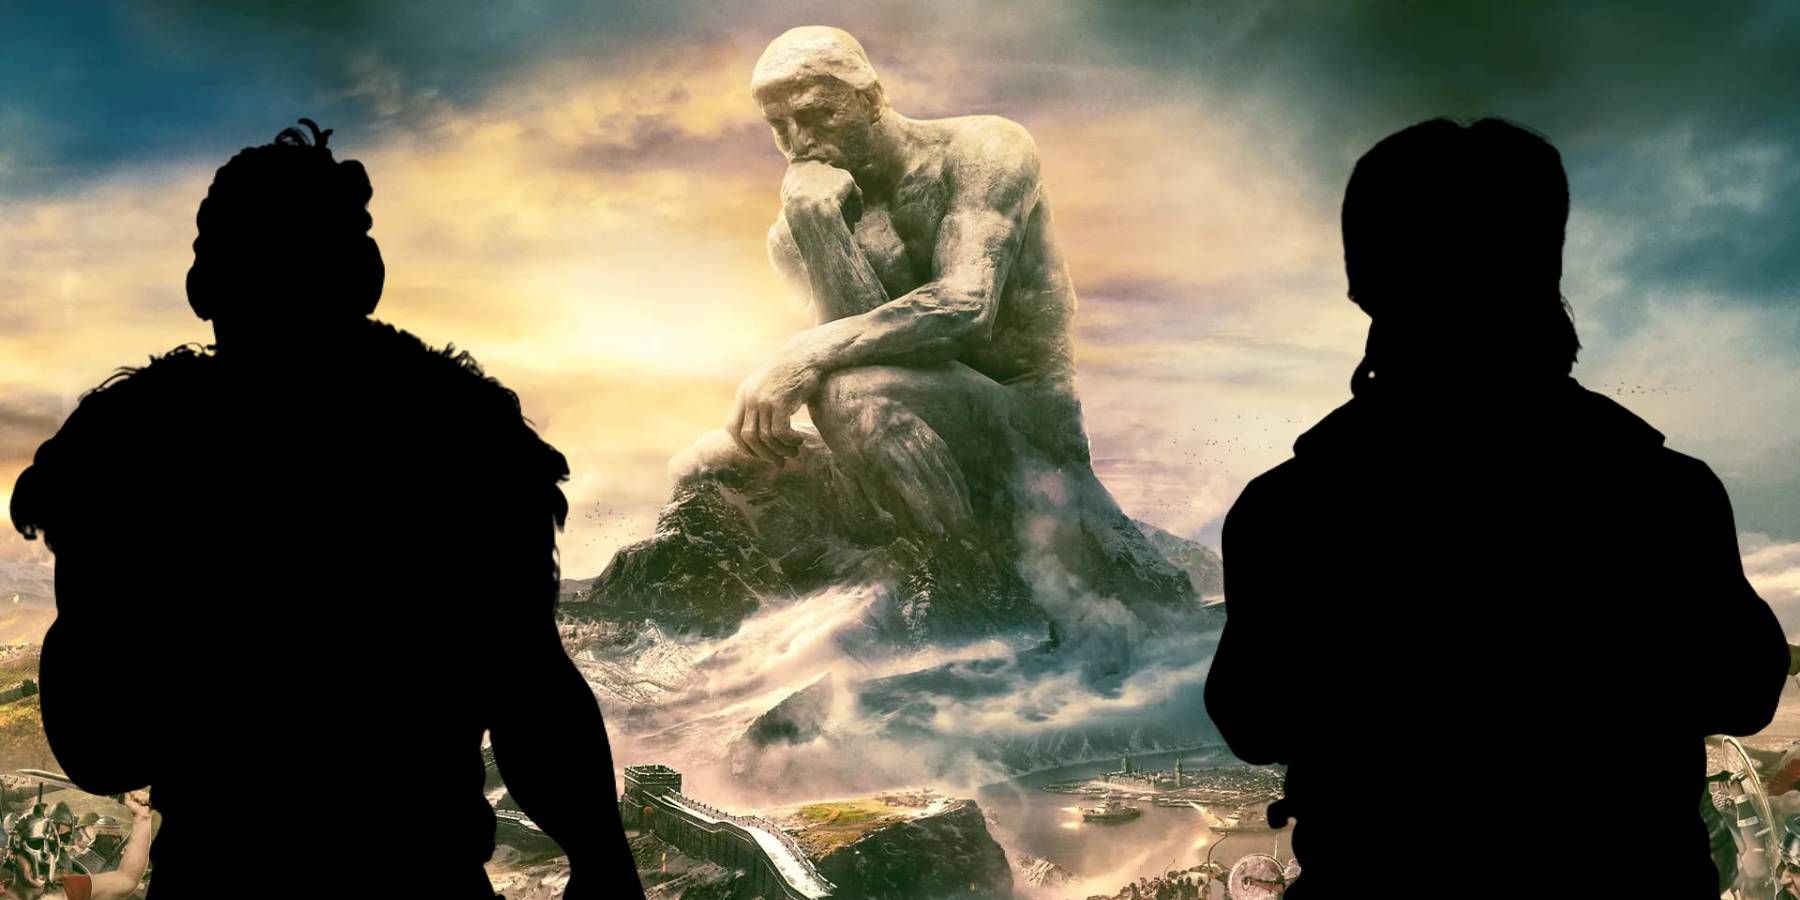 Silhouettes of Kupe and Kublai Khan with art of the Thinker from Civilization 6